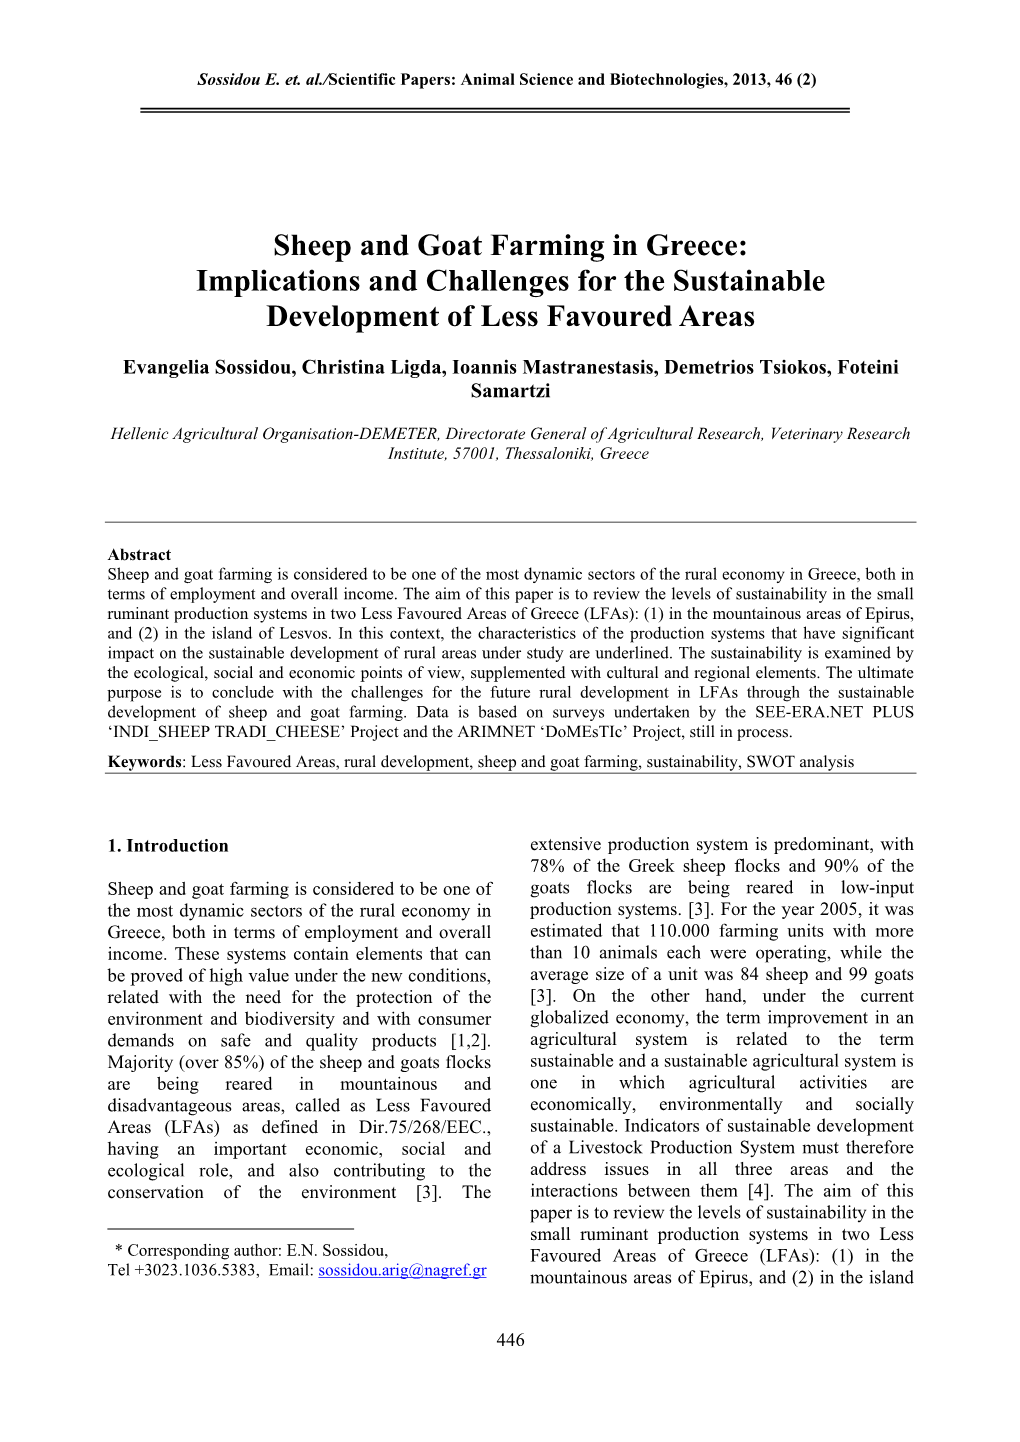 Sheep and Goat Farming in Greece: Implications and Challenges for the Sustainable Development of Less Favoured Areas